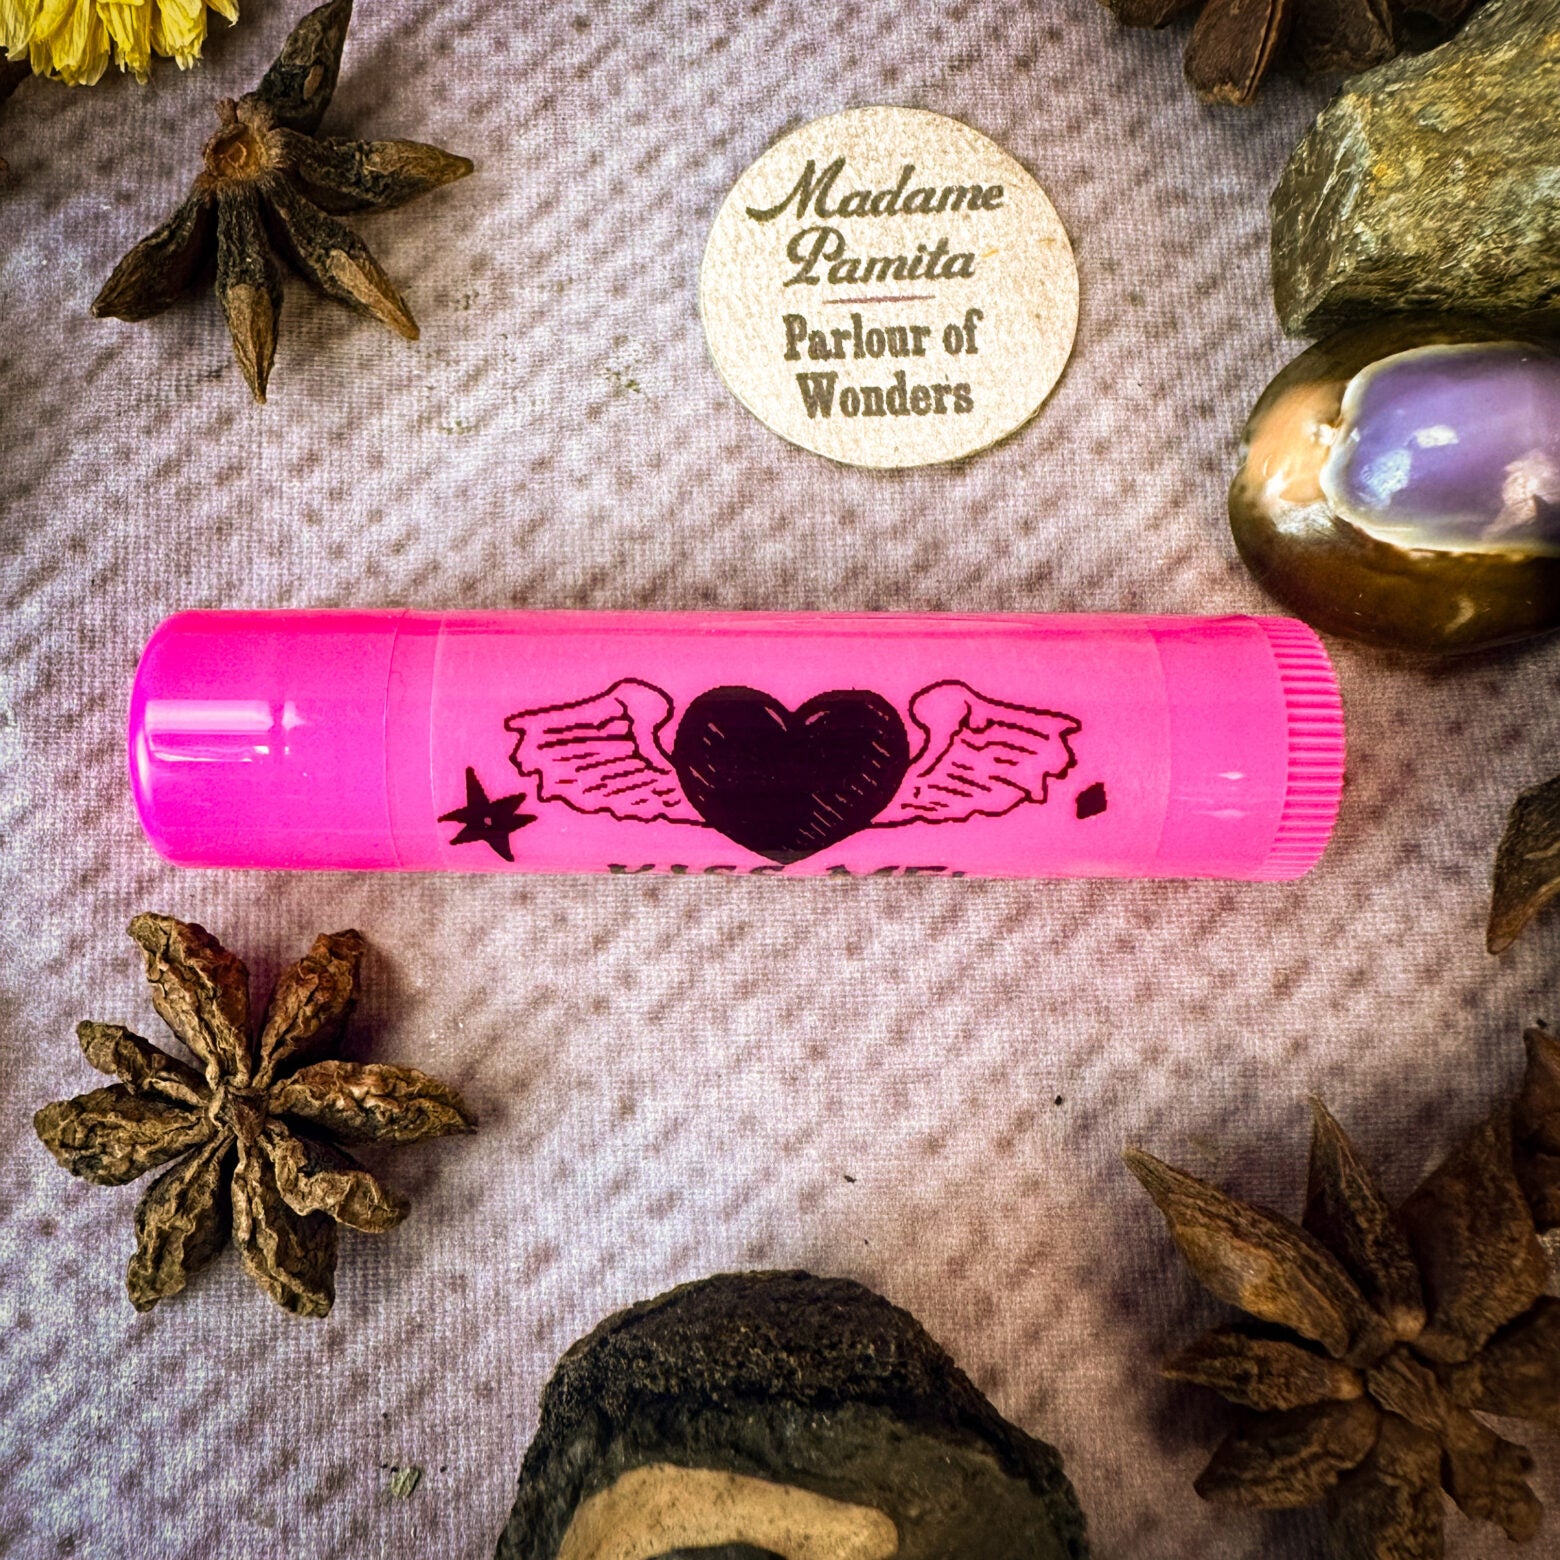 Kiss Me Enchanted Lip Balm by The Love Witch